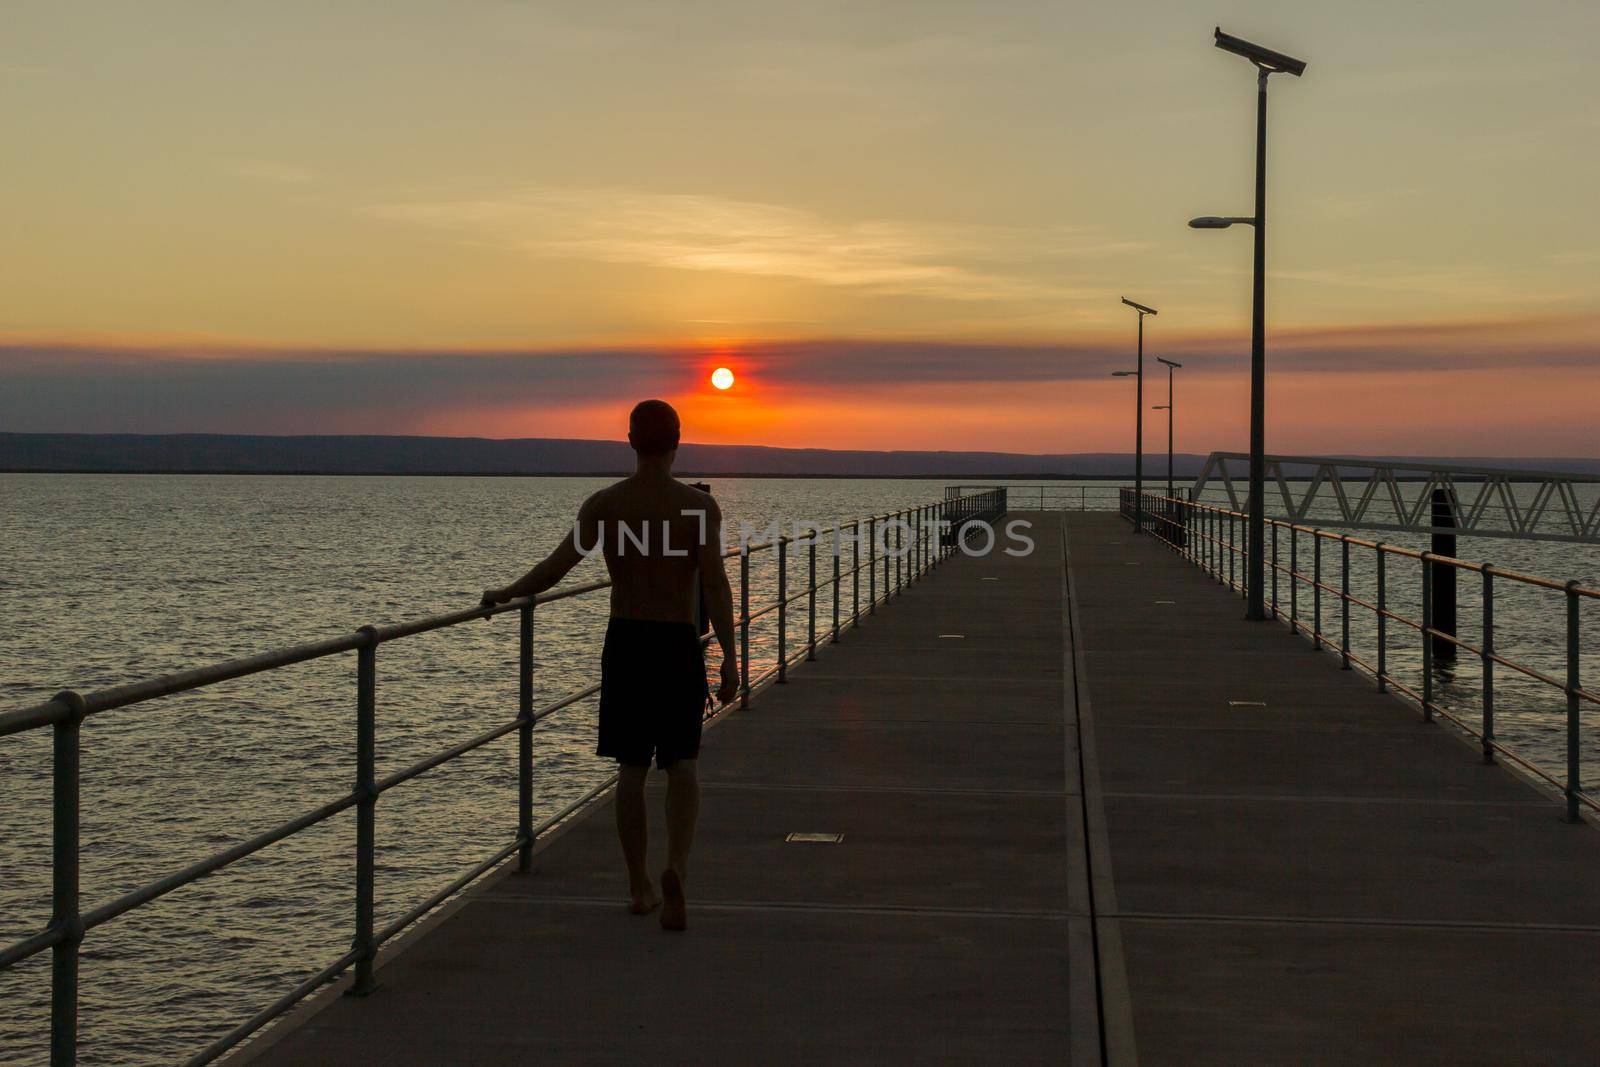 young man walking on a yetty with beautiful sunset, western australia by bettercallcurry